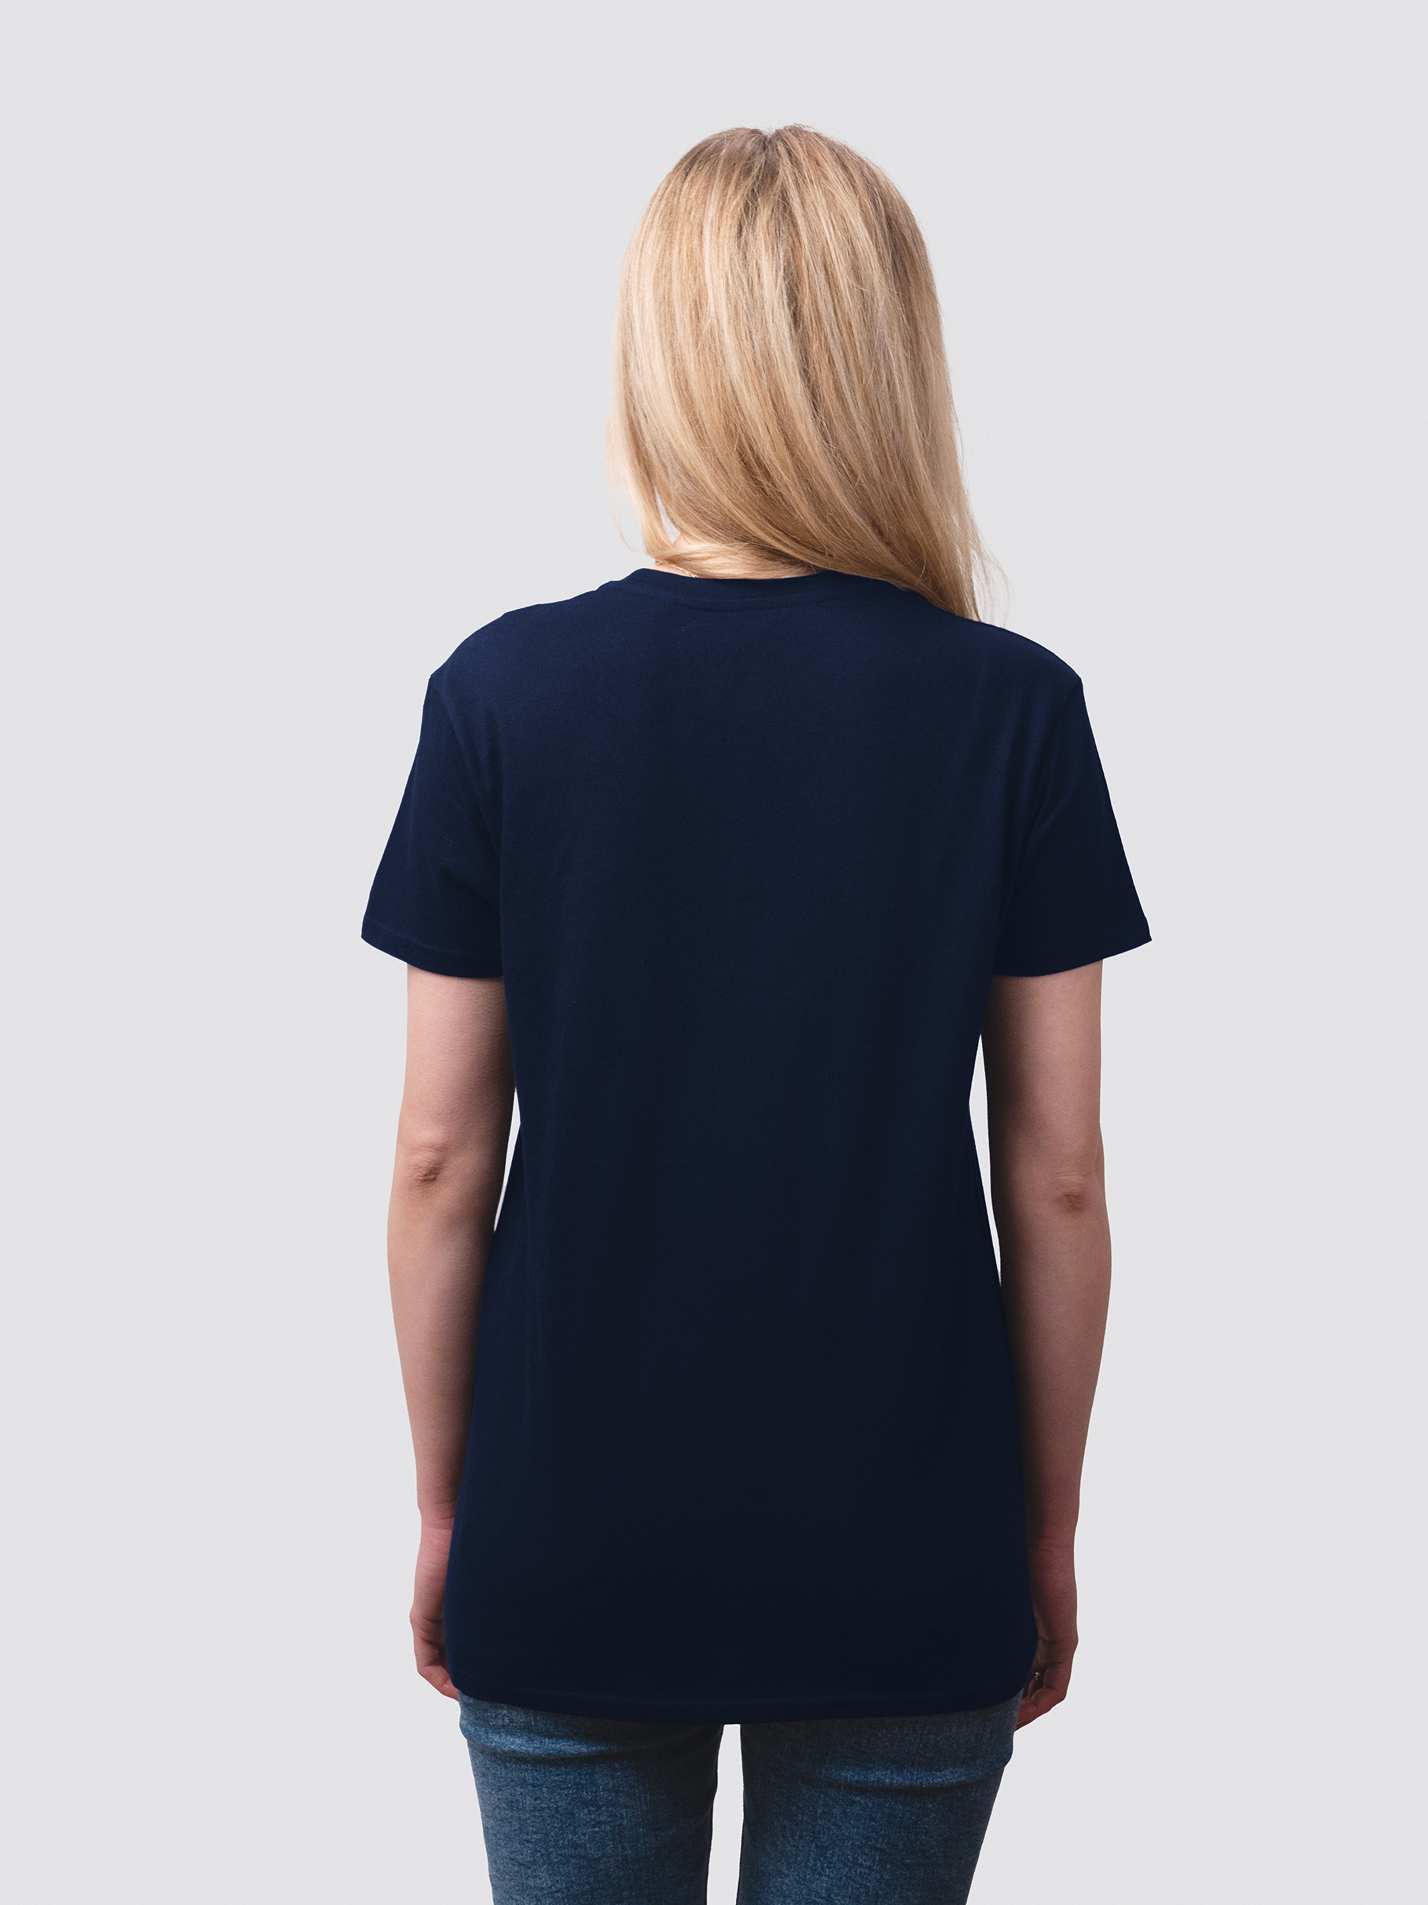 The back of a navy short-sleeve shirt, worn by a female studen